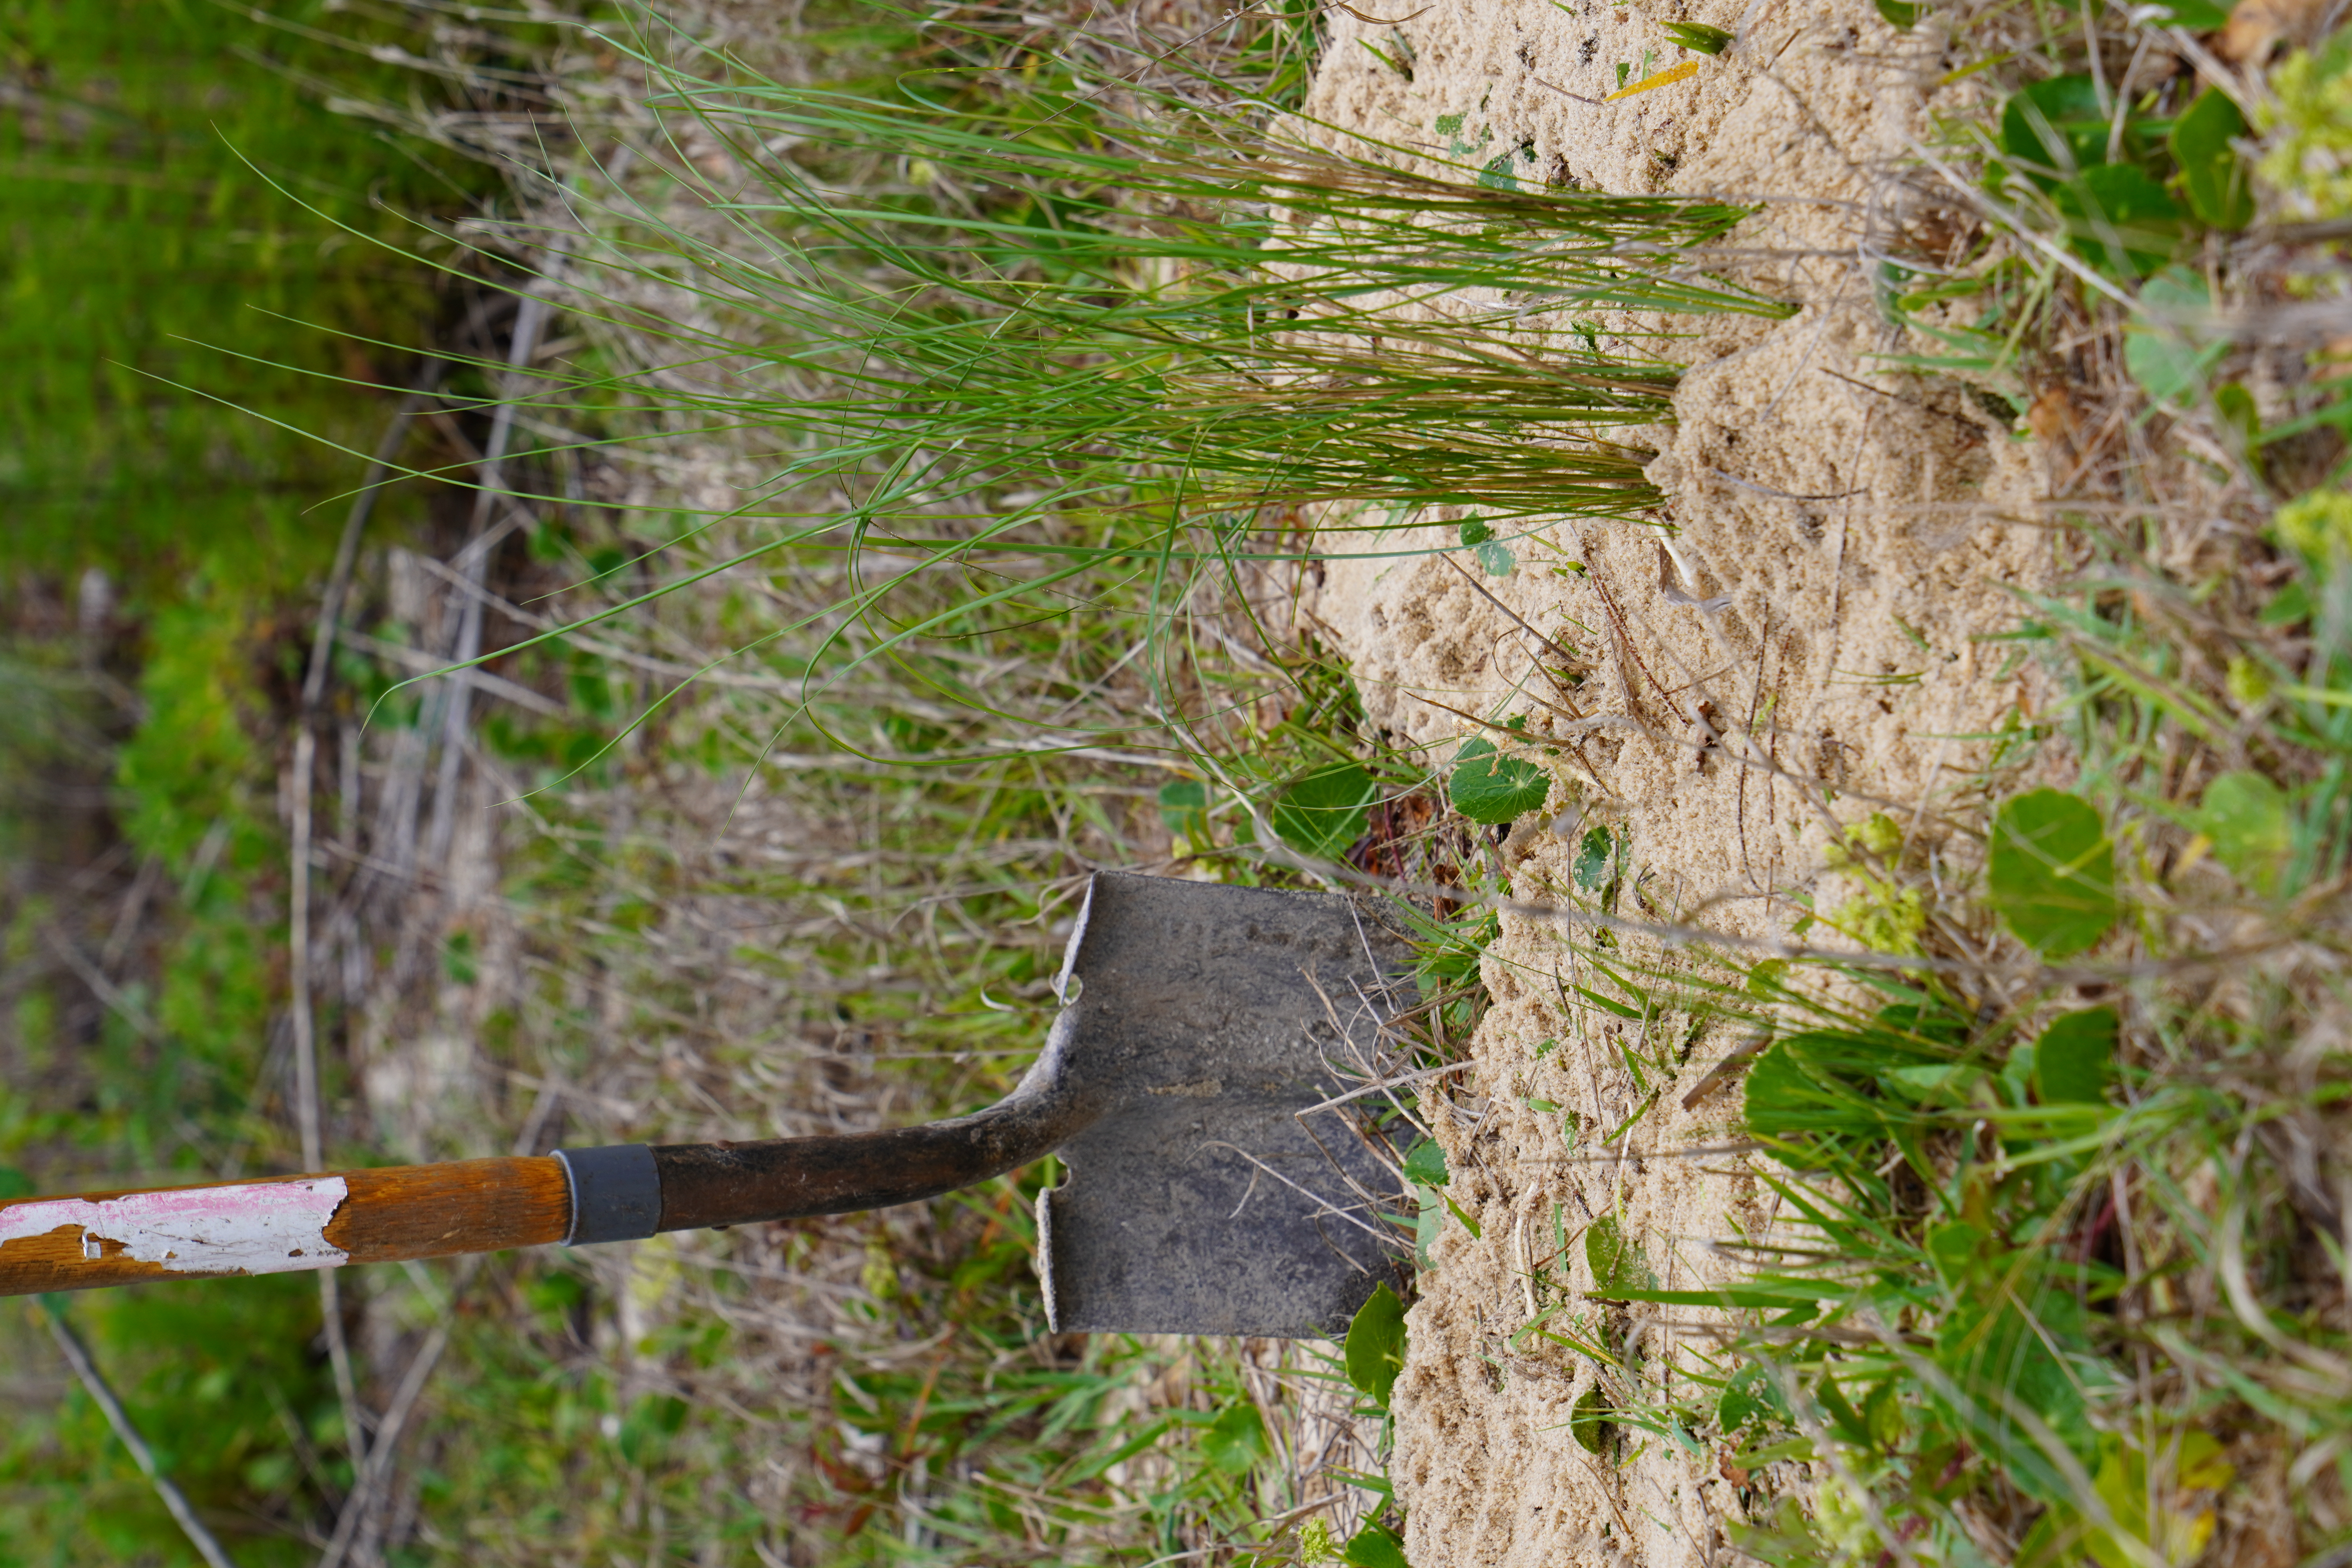 Shovel in dirt next to three planted grasses